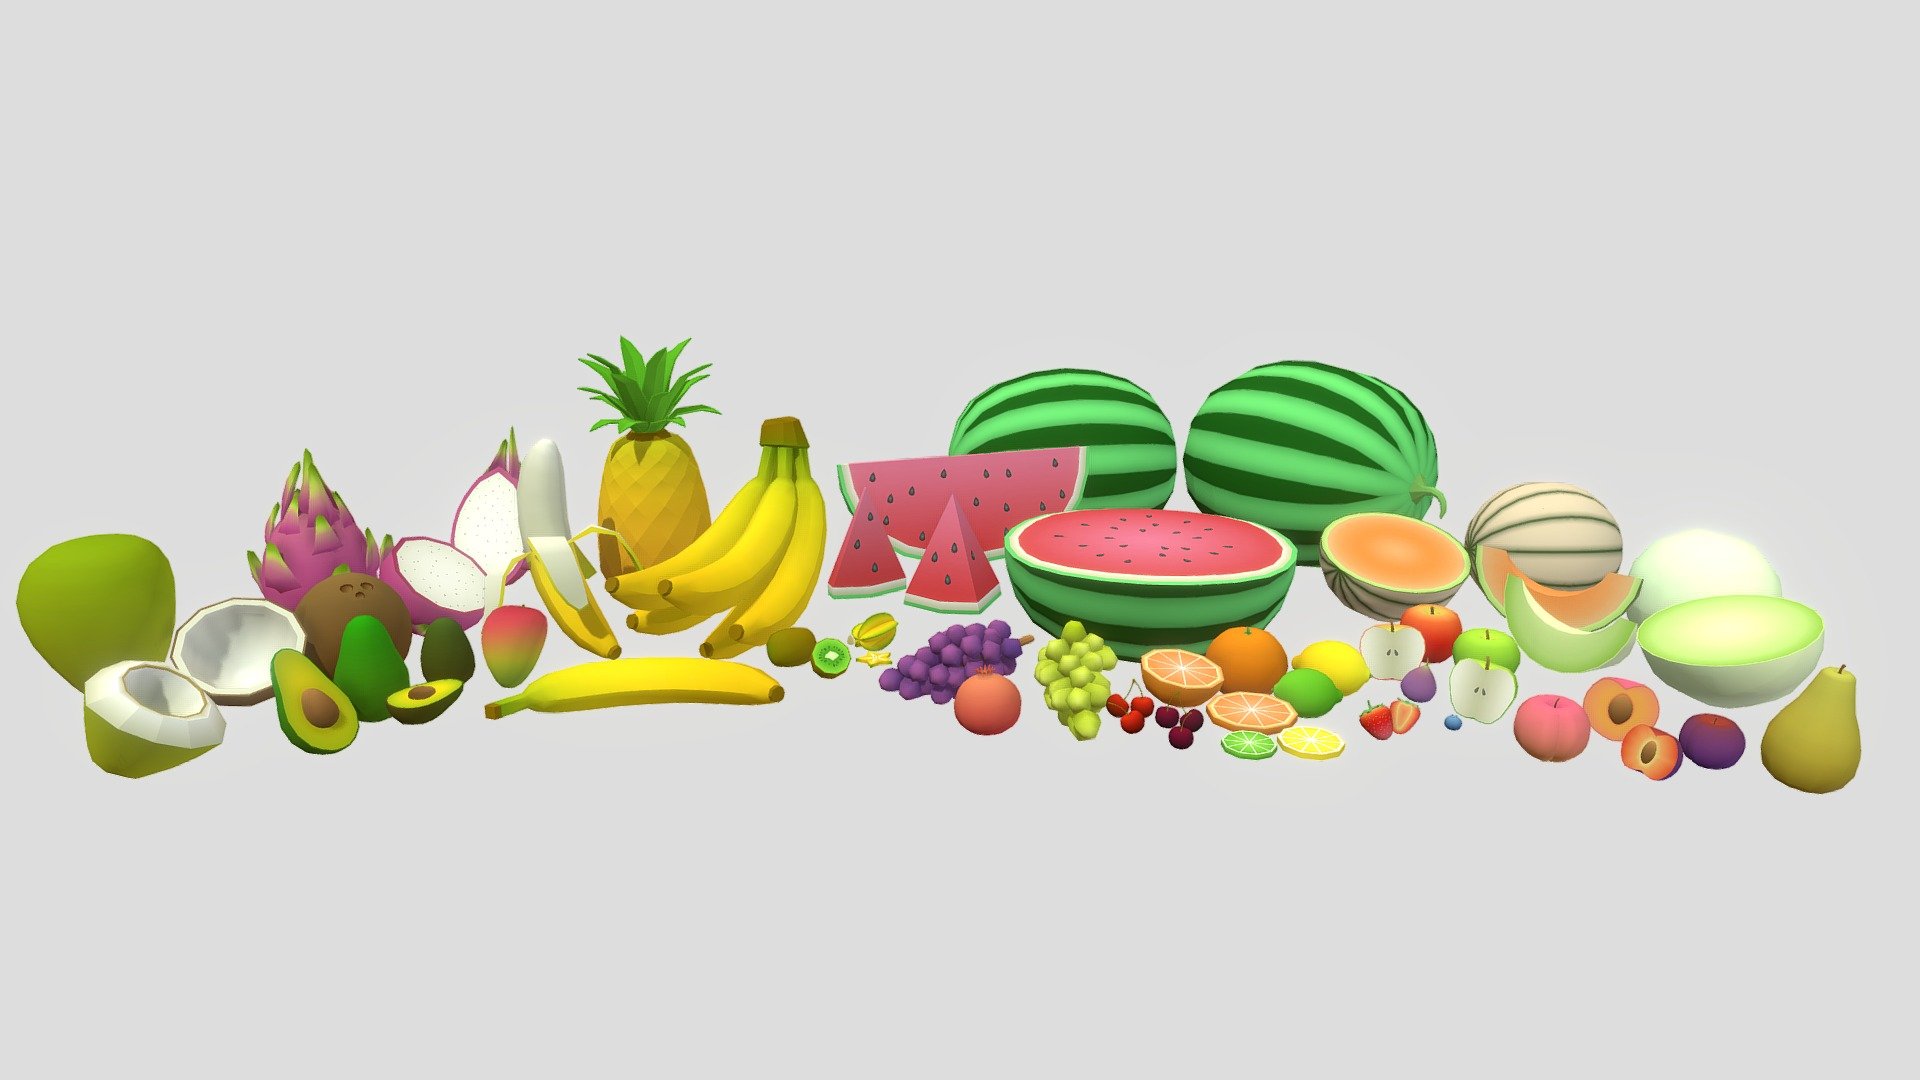 This is a stylized collection of fruit that can be used in anything from low-poly mobile games to graphic design. Models range from 200 tris/100 faces to the largest model being 2280 tris/2122 faces, average model is roughly 400 tris. Model scale is in centimeters. Texture is a single 1024 x 1024 palette map that all models share, available in PNG, JPEG, and Targa.

This pack contains:

24 Fruit:




Watermelon

Cantaloupe

Honeydew

Apple (red/green)

Orange

Lemon 

Lime

Banana

Peach

Plum

Pear

Fig

Cherry (red/black)

Strawberry

Blueberry

Grape (purple/green)

Pomegranate

Pineapple

Mango

Kiwi

Coconut (brown/green)

Starfruit

Dragonfruit

Avocado (florida/hass)

60 Meshes:




30 Whole Fruit

16 Halves

10 Slices

4 Other (peeled/bunch)

1 Texture map - Low Poly Fruit Set - Buy Royalty Free 3D model by erf-3Dmodels 3d model